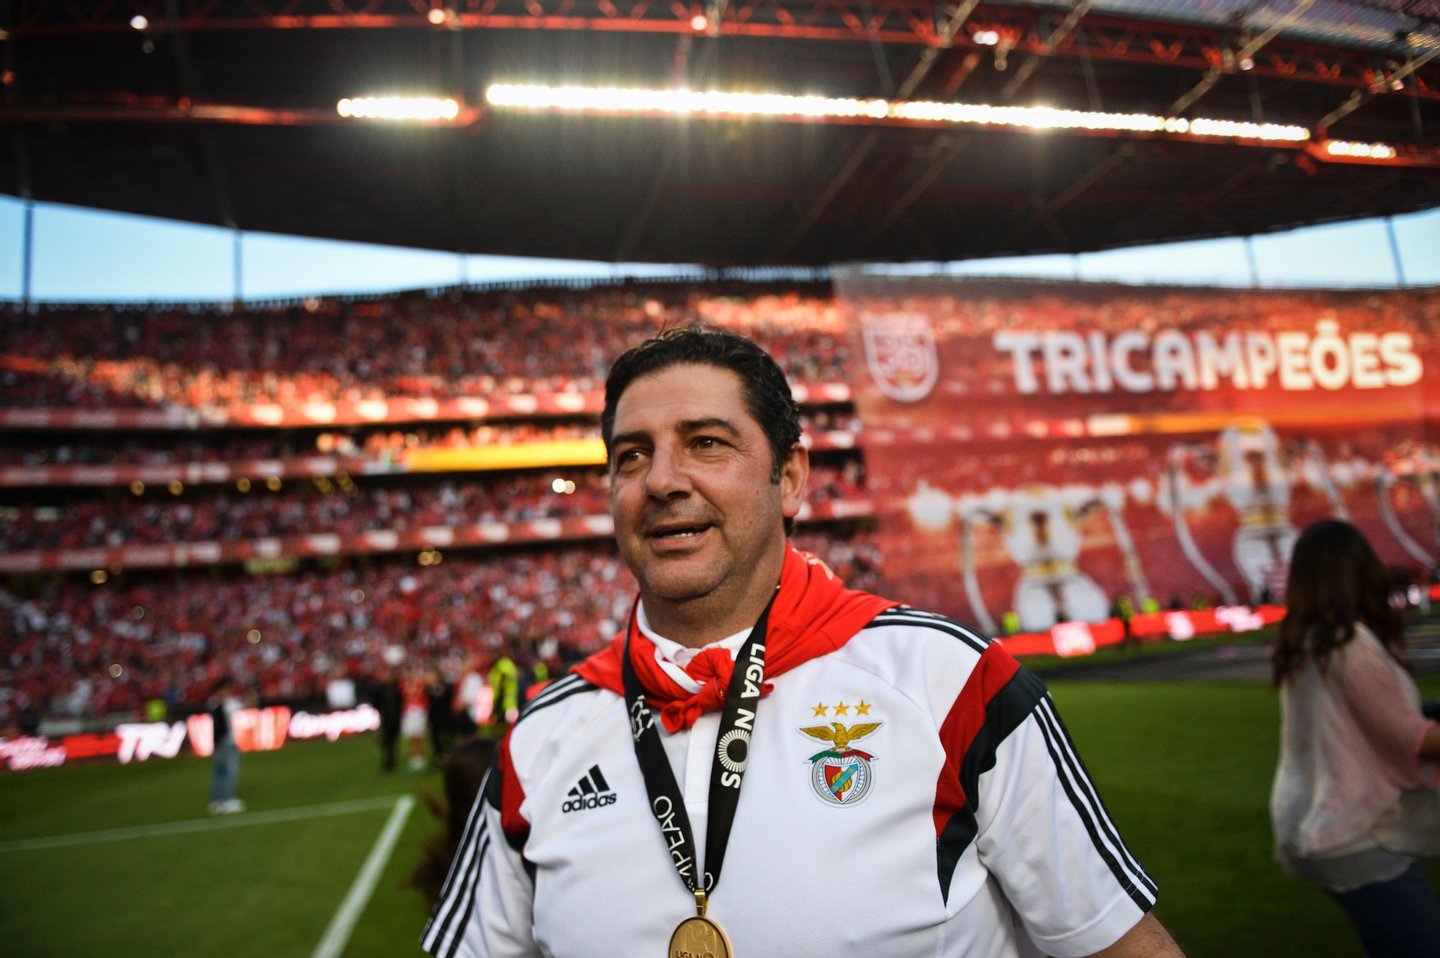 Benfica's head coach Rui Vitoria gestures as he celebrates Benfica's 35th Portuguese league title at the end of the Portuguese league football match Benfica vs CD Nacional at Luz stadium in Lisbon on May 15, 2015.  / AFP / PATRICIA DE MELO MOREIRA        (Photo credit should read PATRICIA DE MELO MOREIRA/AFP/Getty Images)